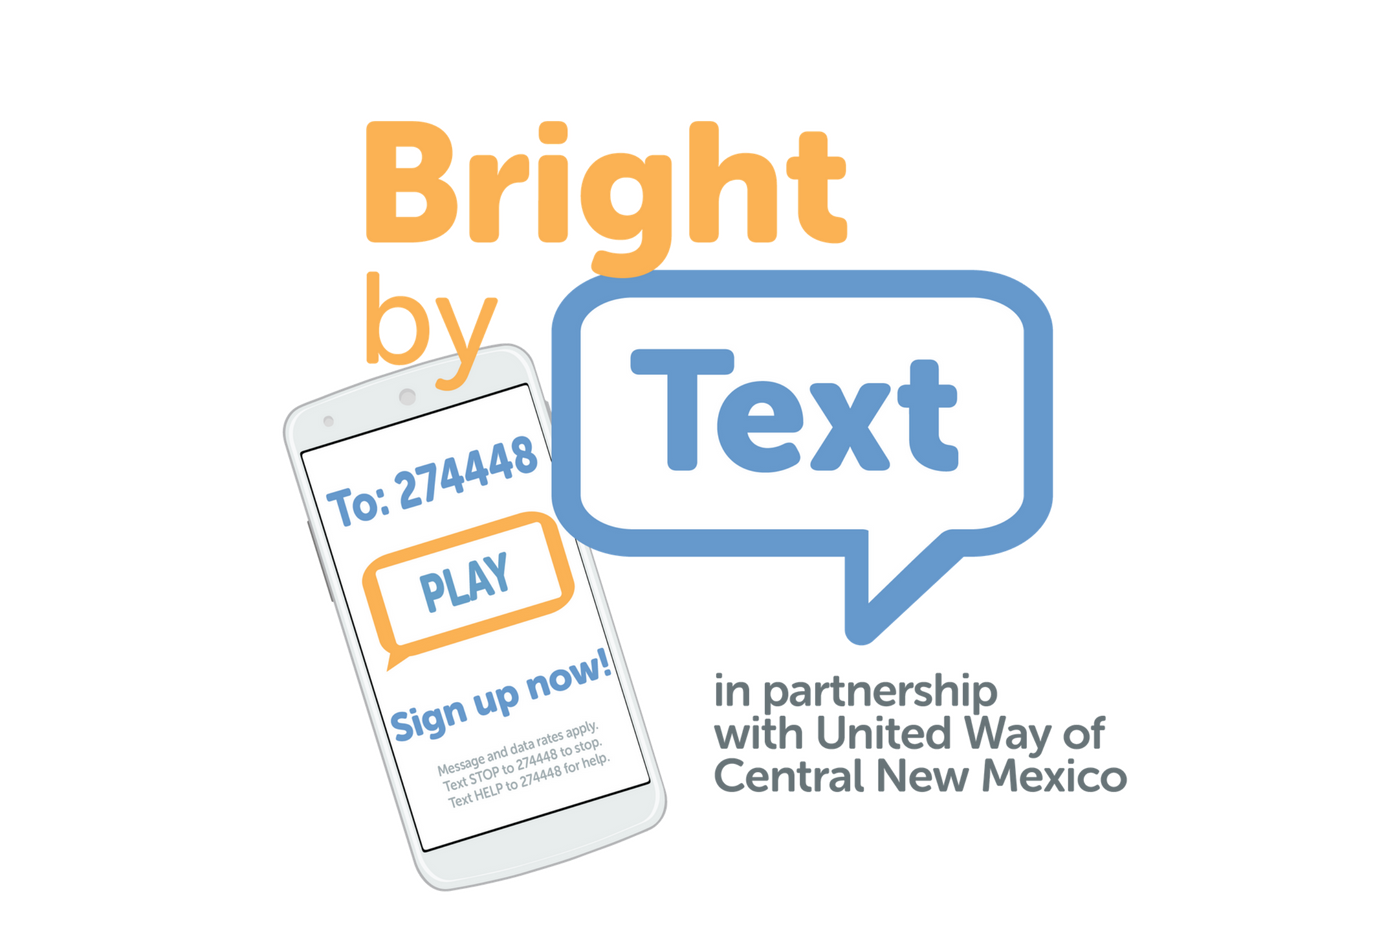 Bright by Text